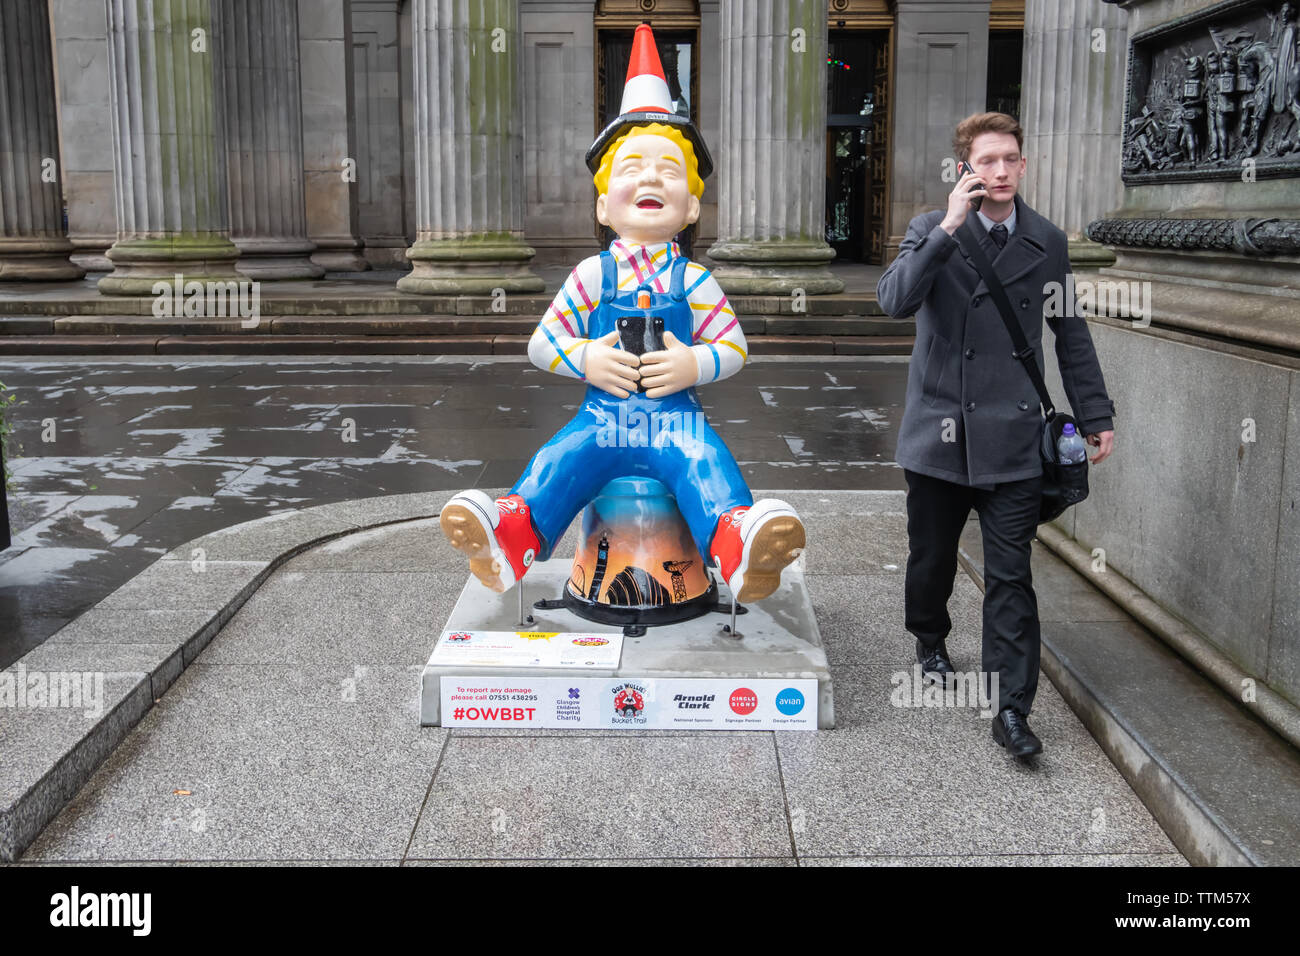 Glasgow, Scotland, UK. 17th June, 2019. Oor Wee Yin's Banter, created by Rachael Tidmore. This statue is inspired by the Year of Young People 2018, which celebrated the achievements of Young People in Scotland, valued the contributions that they make to society and showed that changes in attitudes start with listening to one another. The sculpture is part of Oor Wullie’s BIG Bucket Trail. Credit: Skully/Alamy Live News Stock Photo